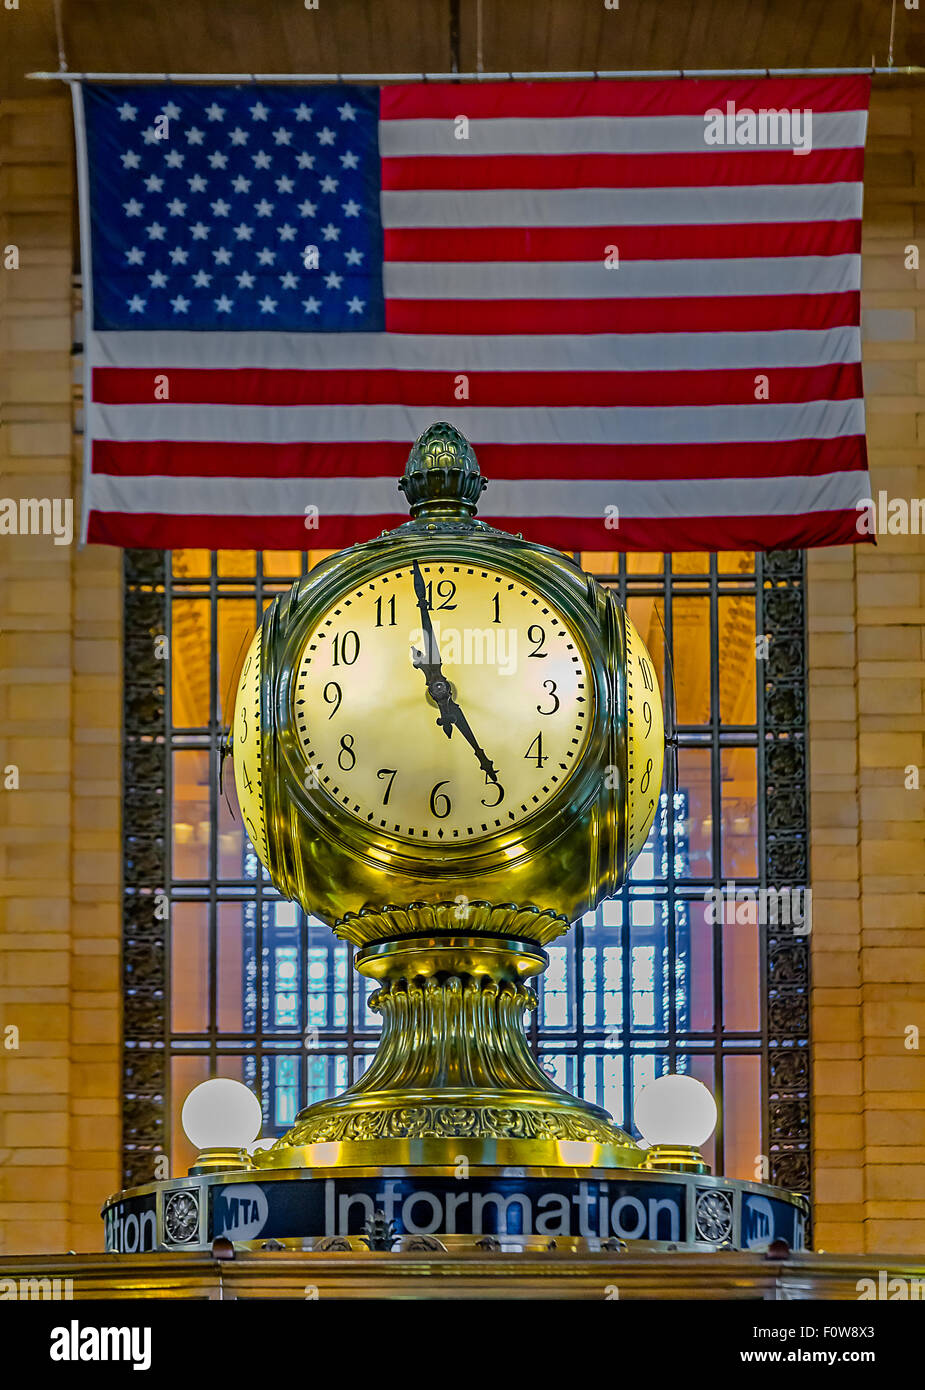 Opal Clock at the information booth in the main terminal at Grand Central Terminal, with the American Flag in the background. Stock Photo